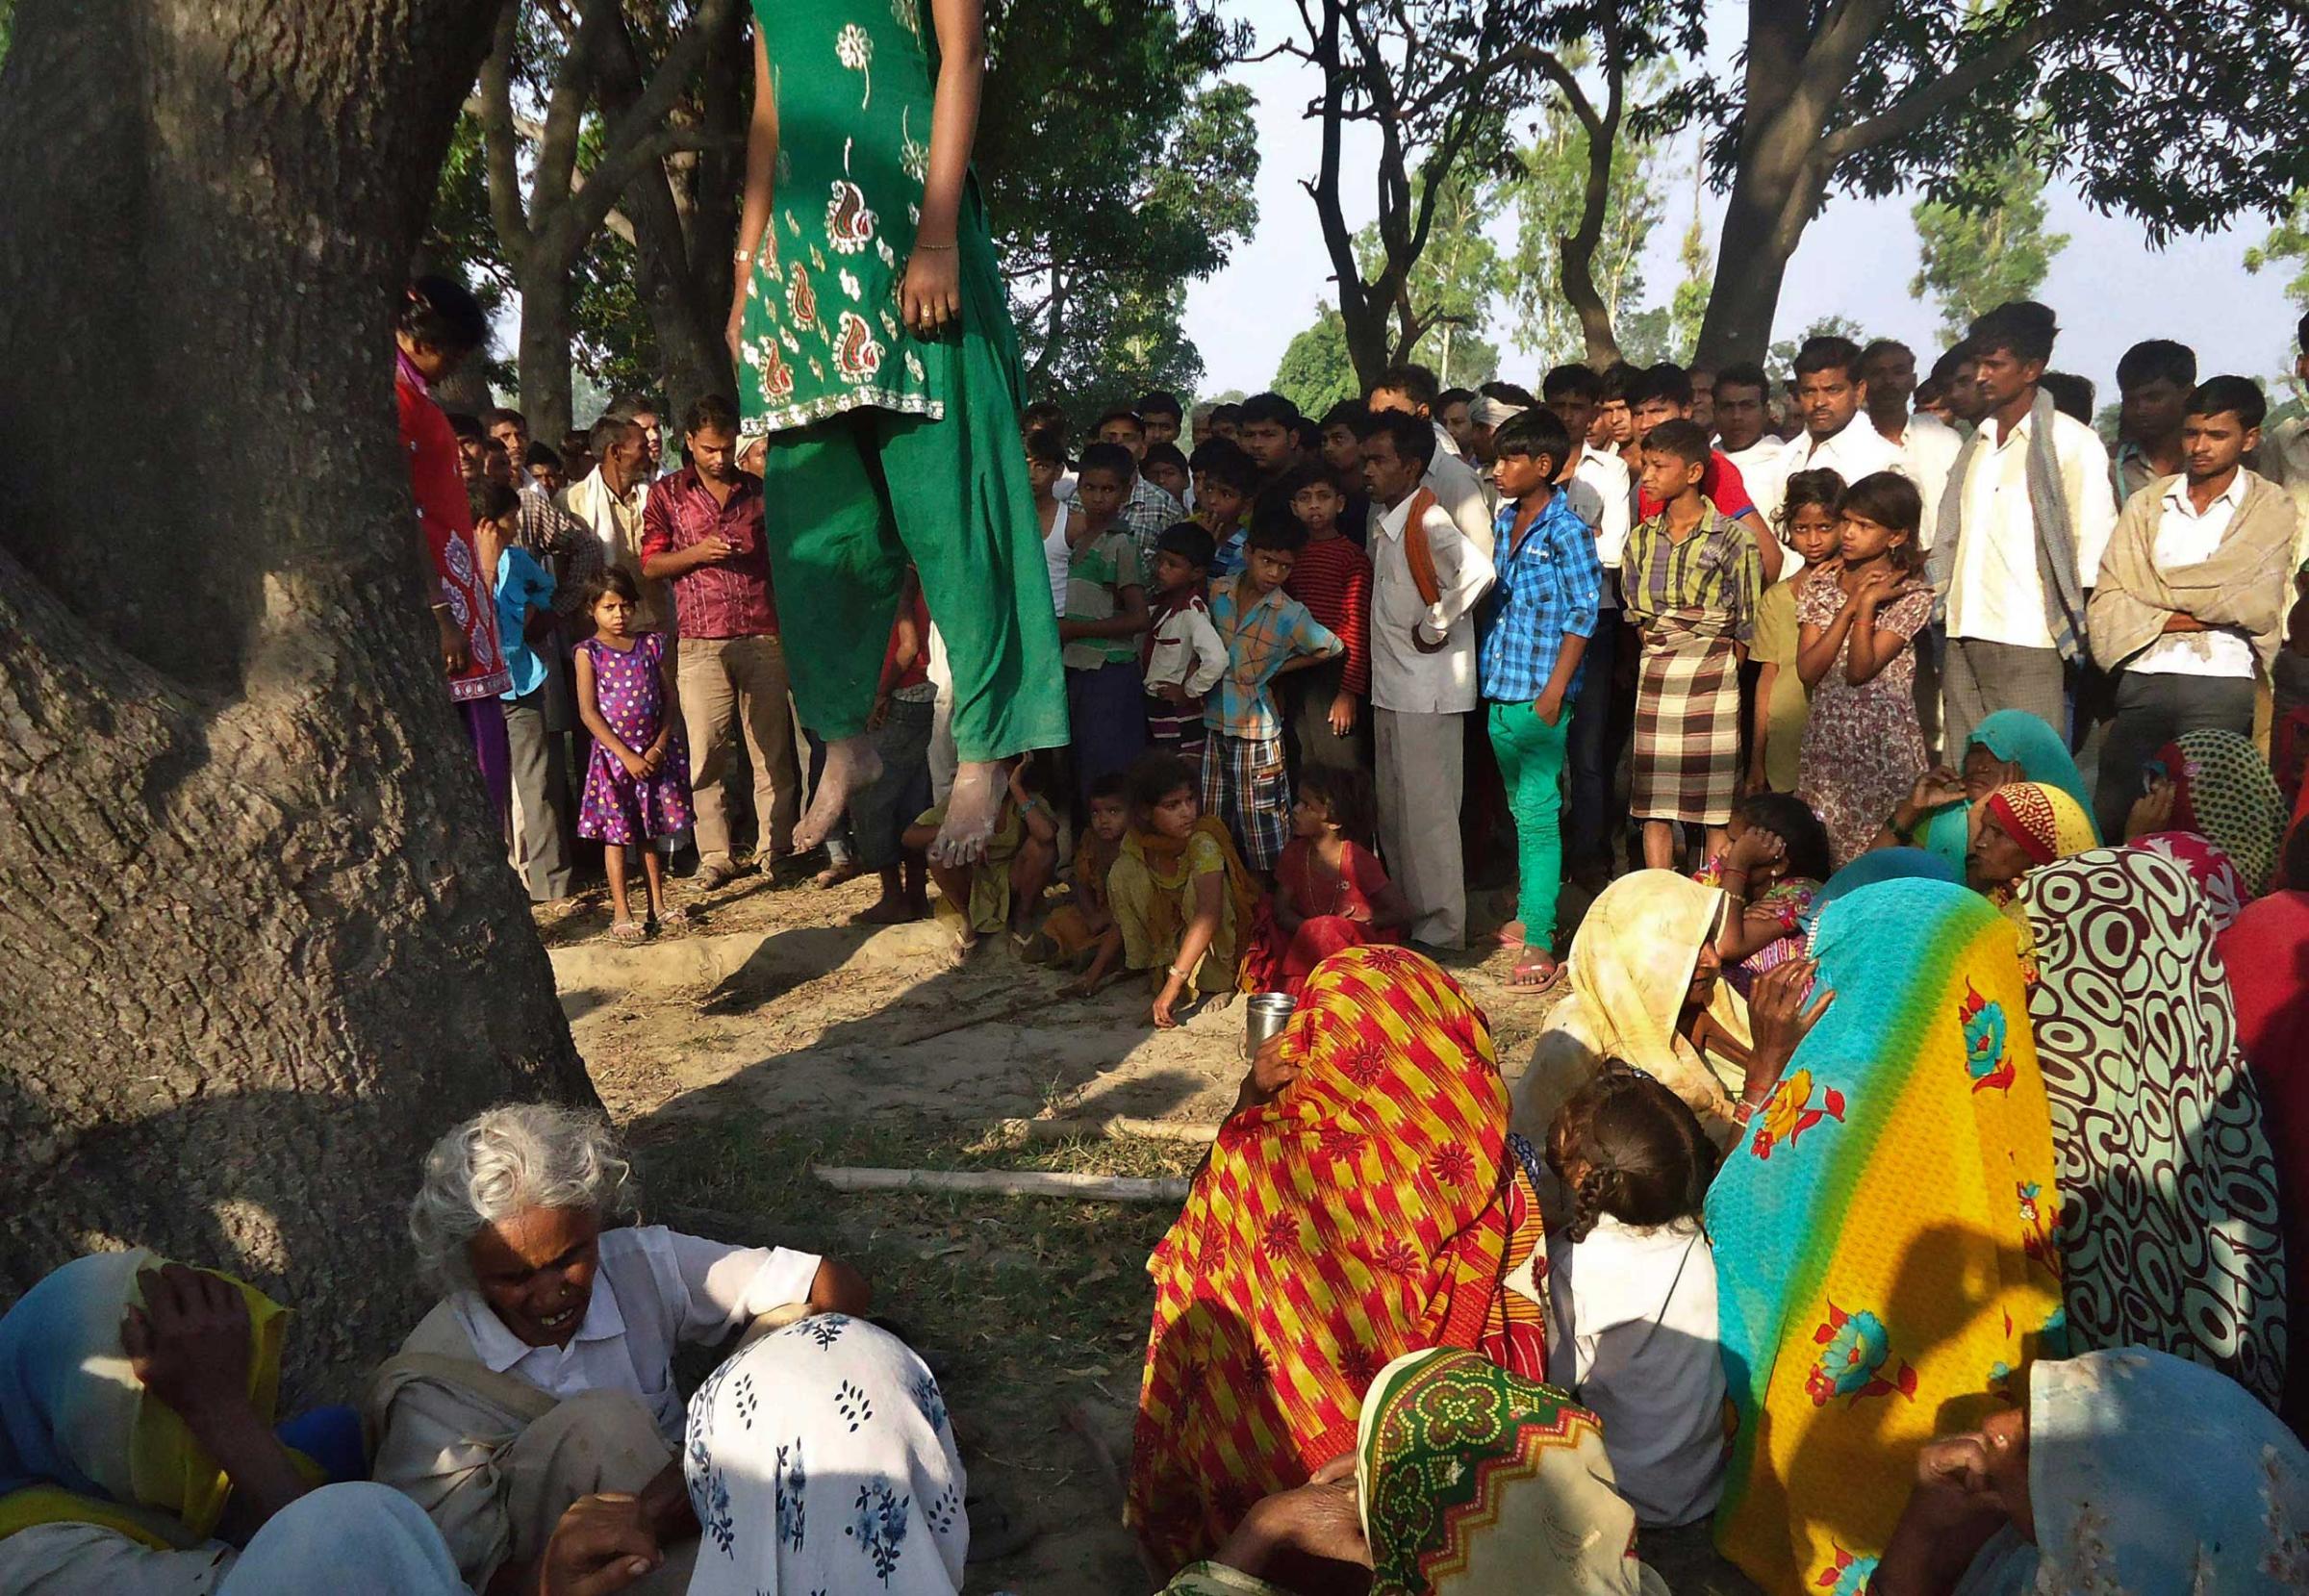 Indian villagers gather around the bodies of two teenage sisters hanging from a tree in Katra village in Uttar Pradesh state, India. The teenage sisters in rural India were raped and killed by attackers who hung their bodies from a mango tree, May 28, 2014.